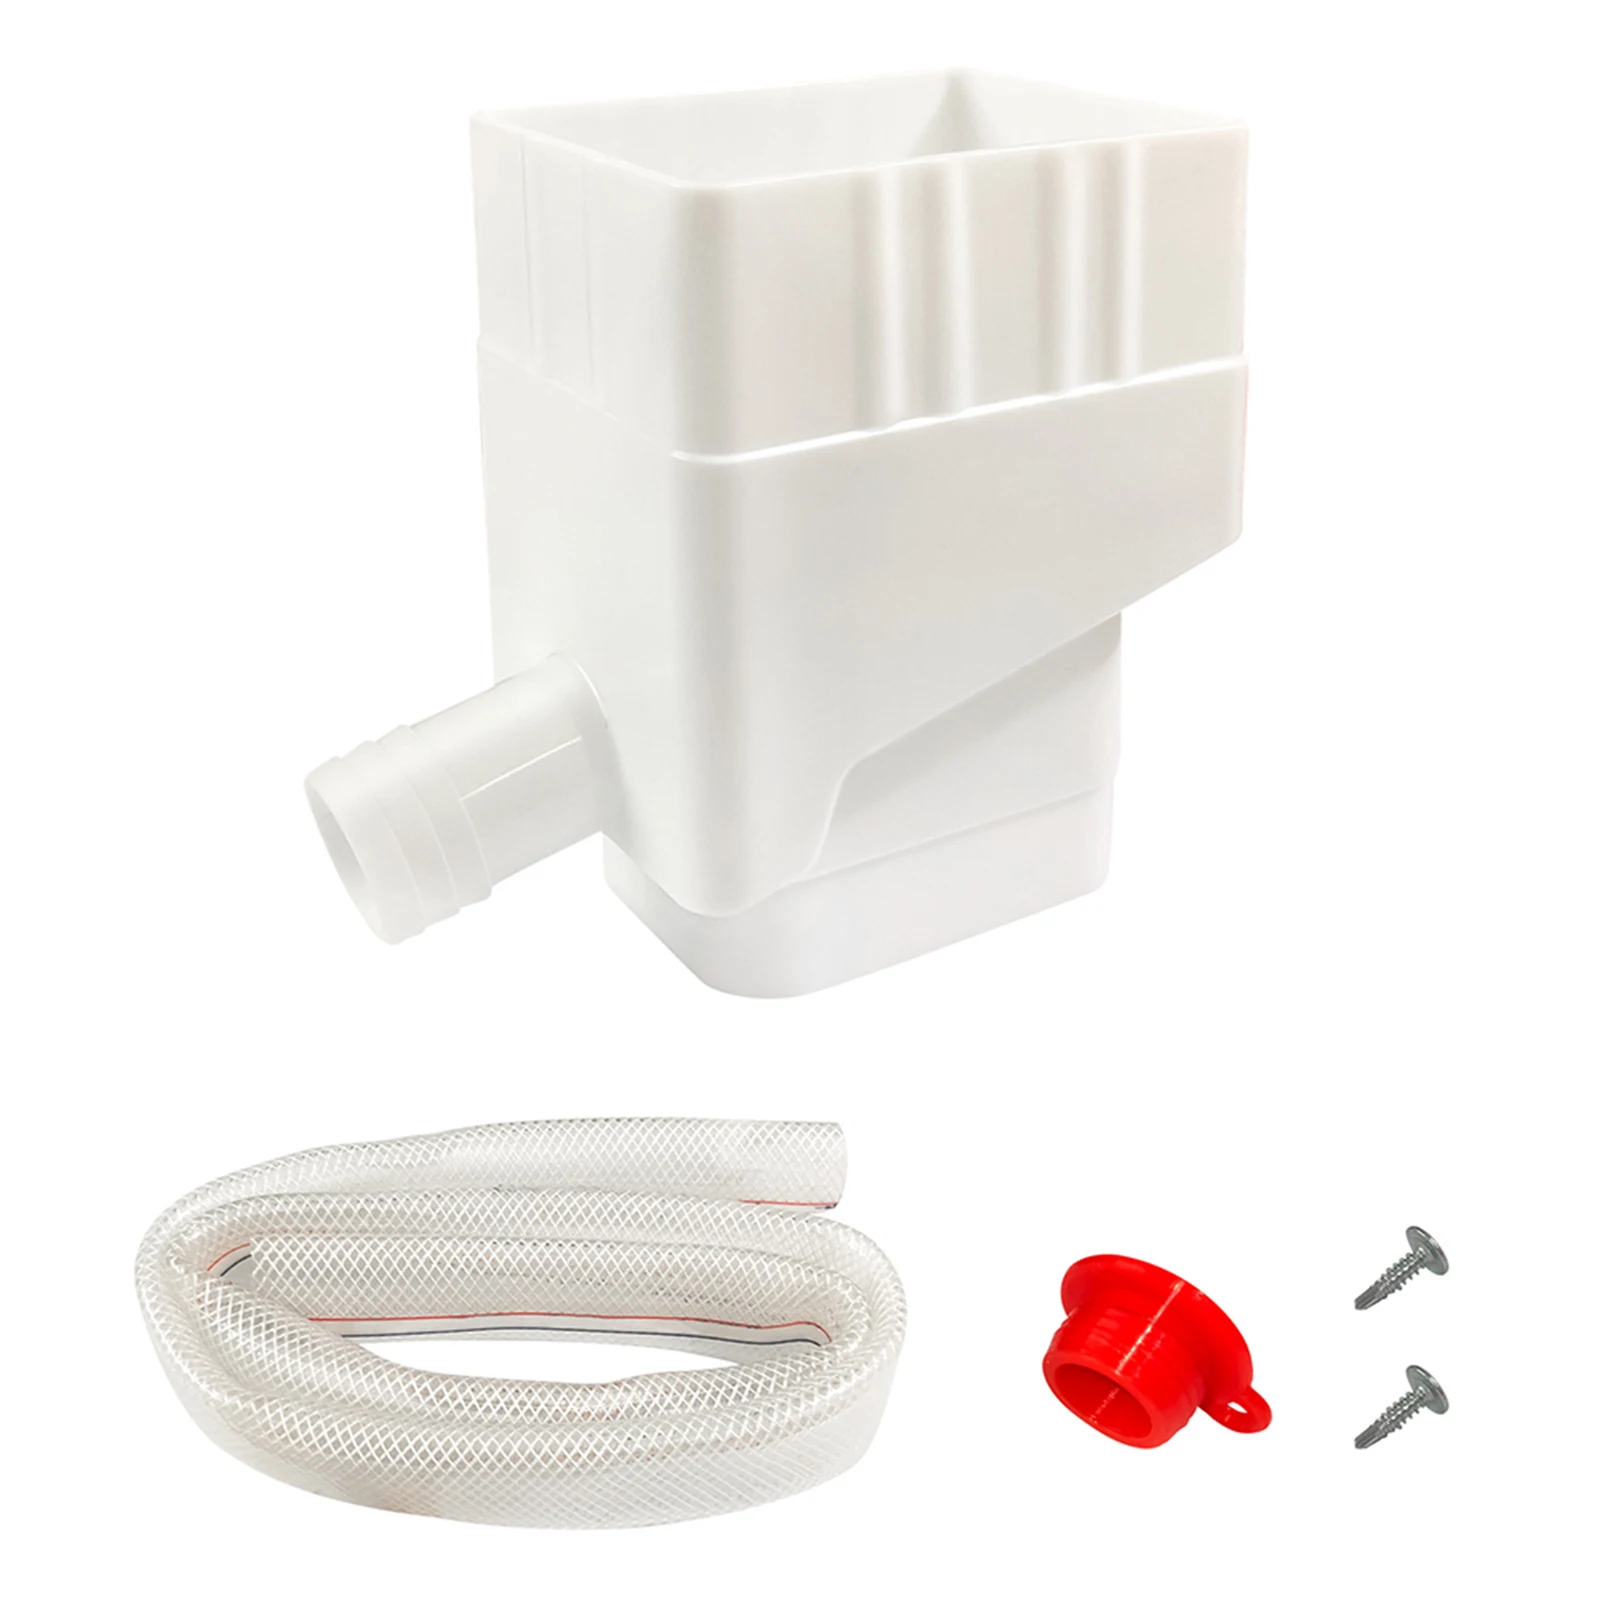 

Water Houseplants Gardens Main Body Red Silicone Plug With 40in Hose Rainwater Collection System Red Silicone Plug Main Body